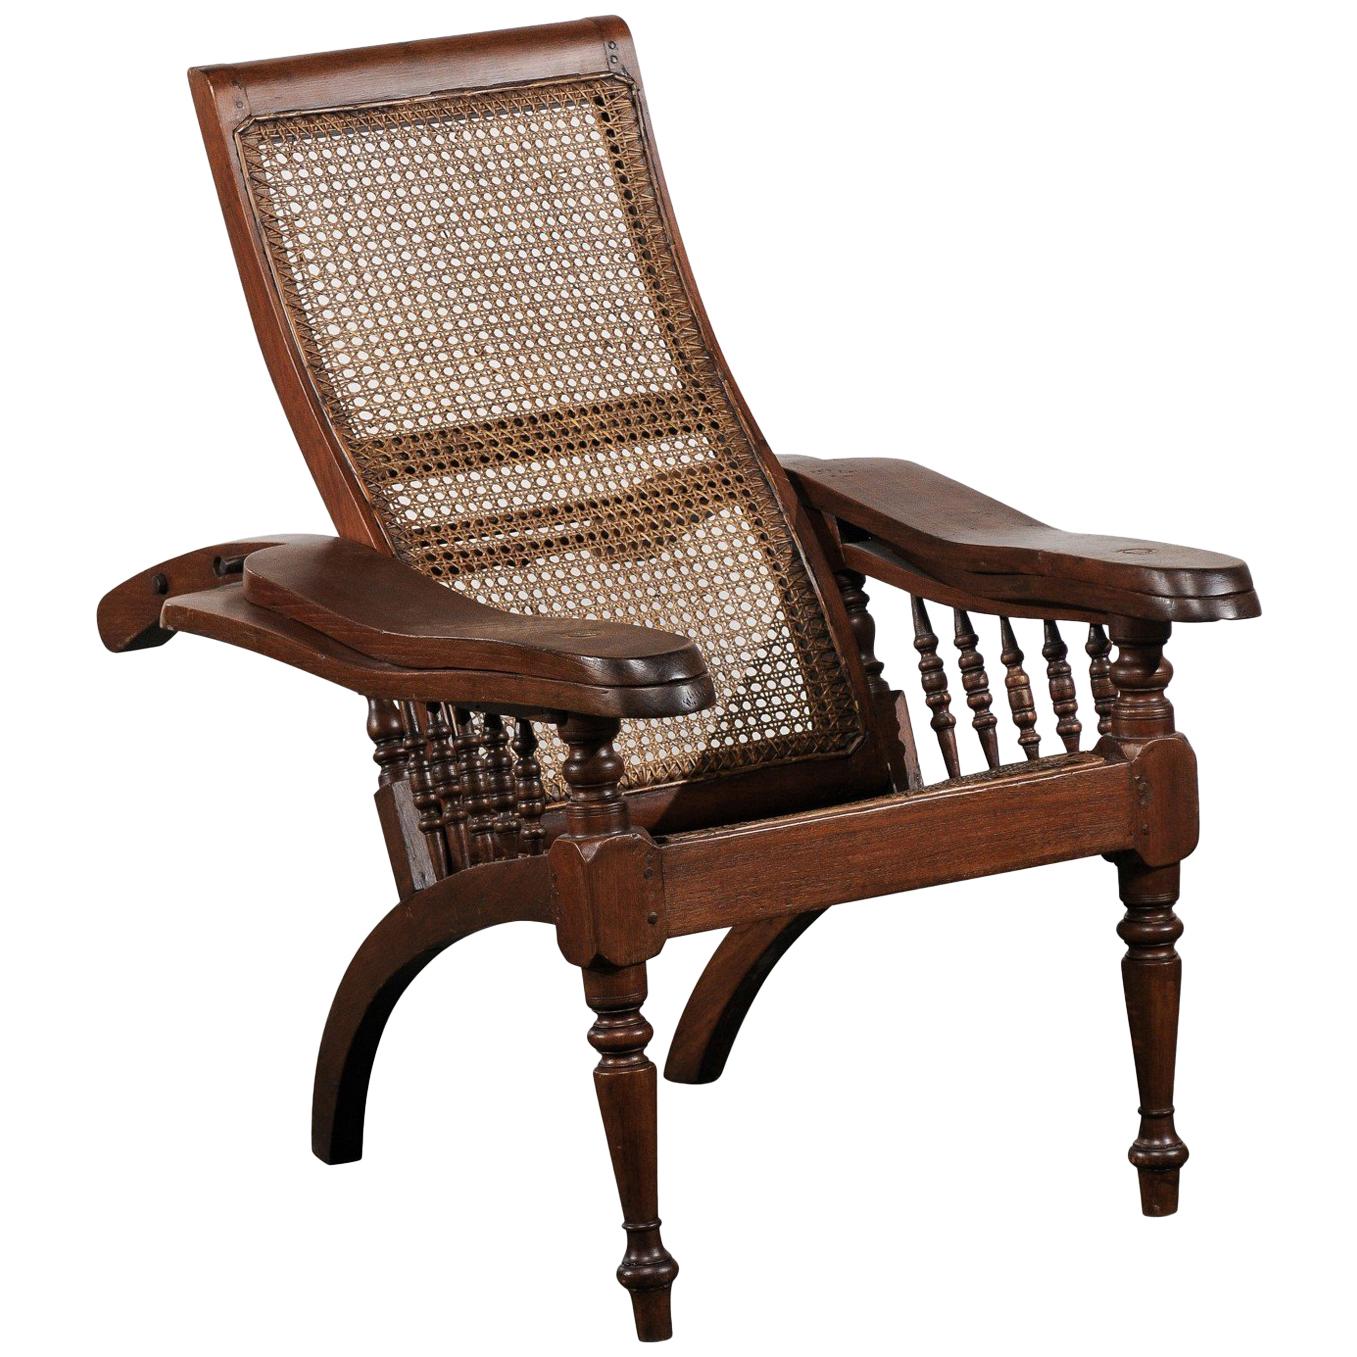 19th Century Anglo-Indian Caned Planters Chair with Leg Stretchers, Metamorphic